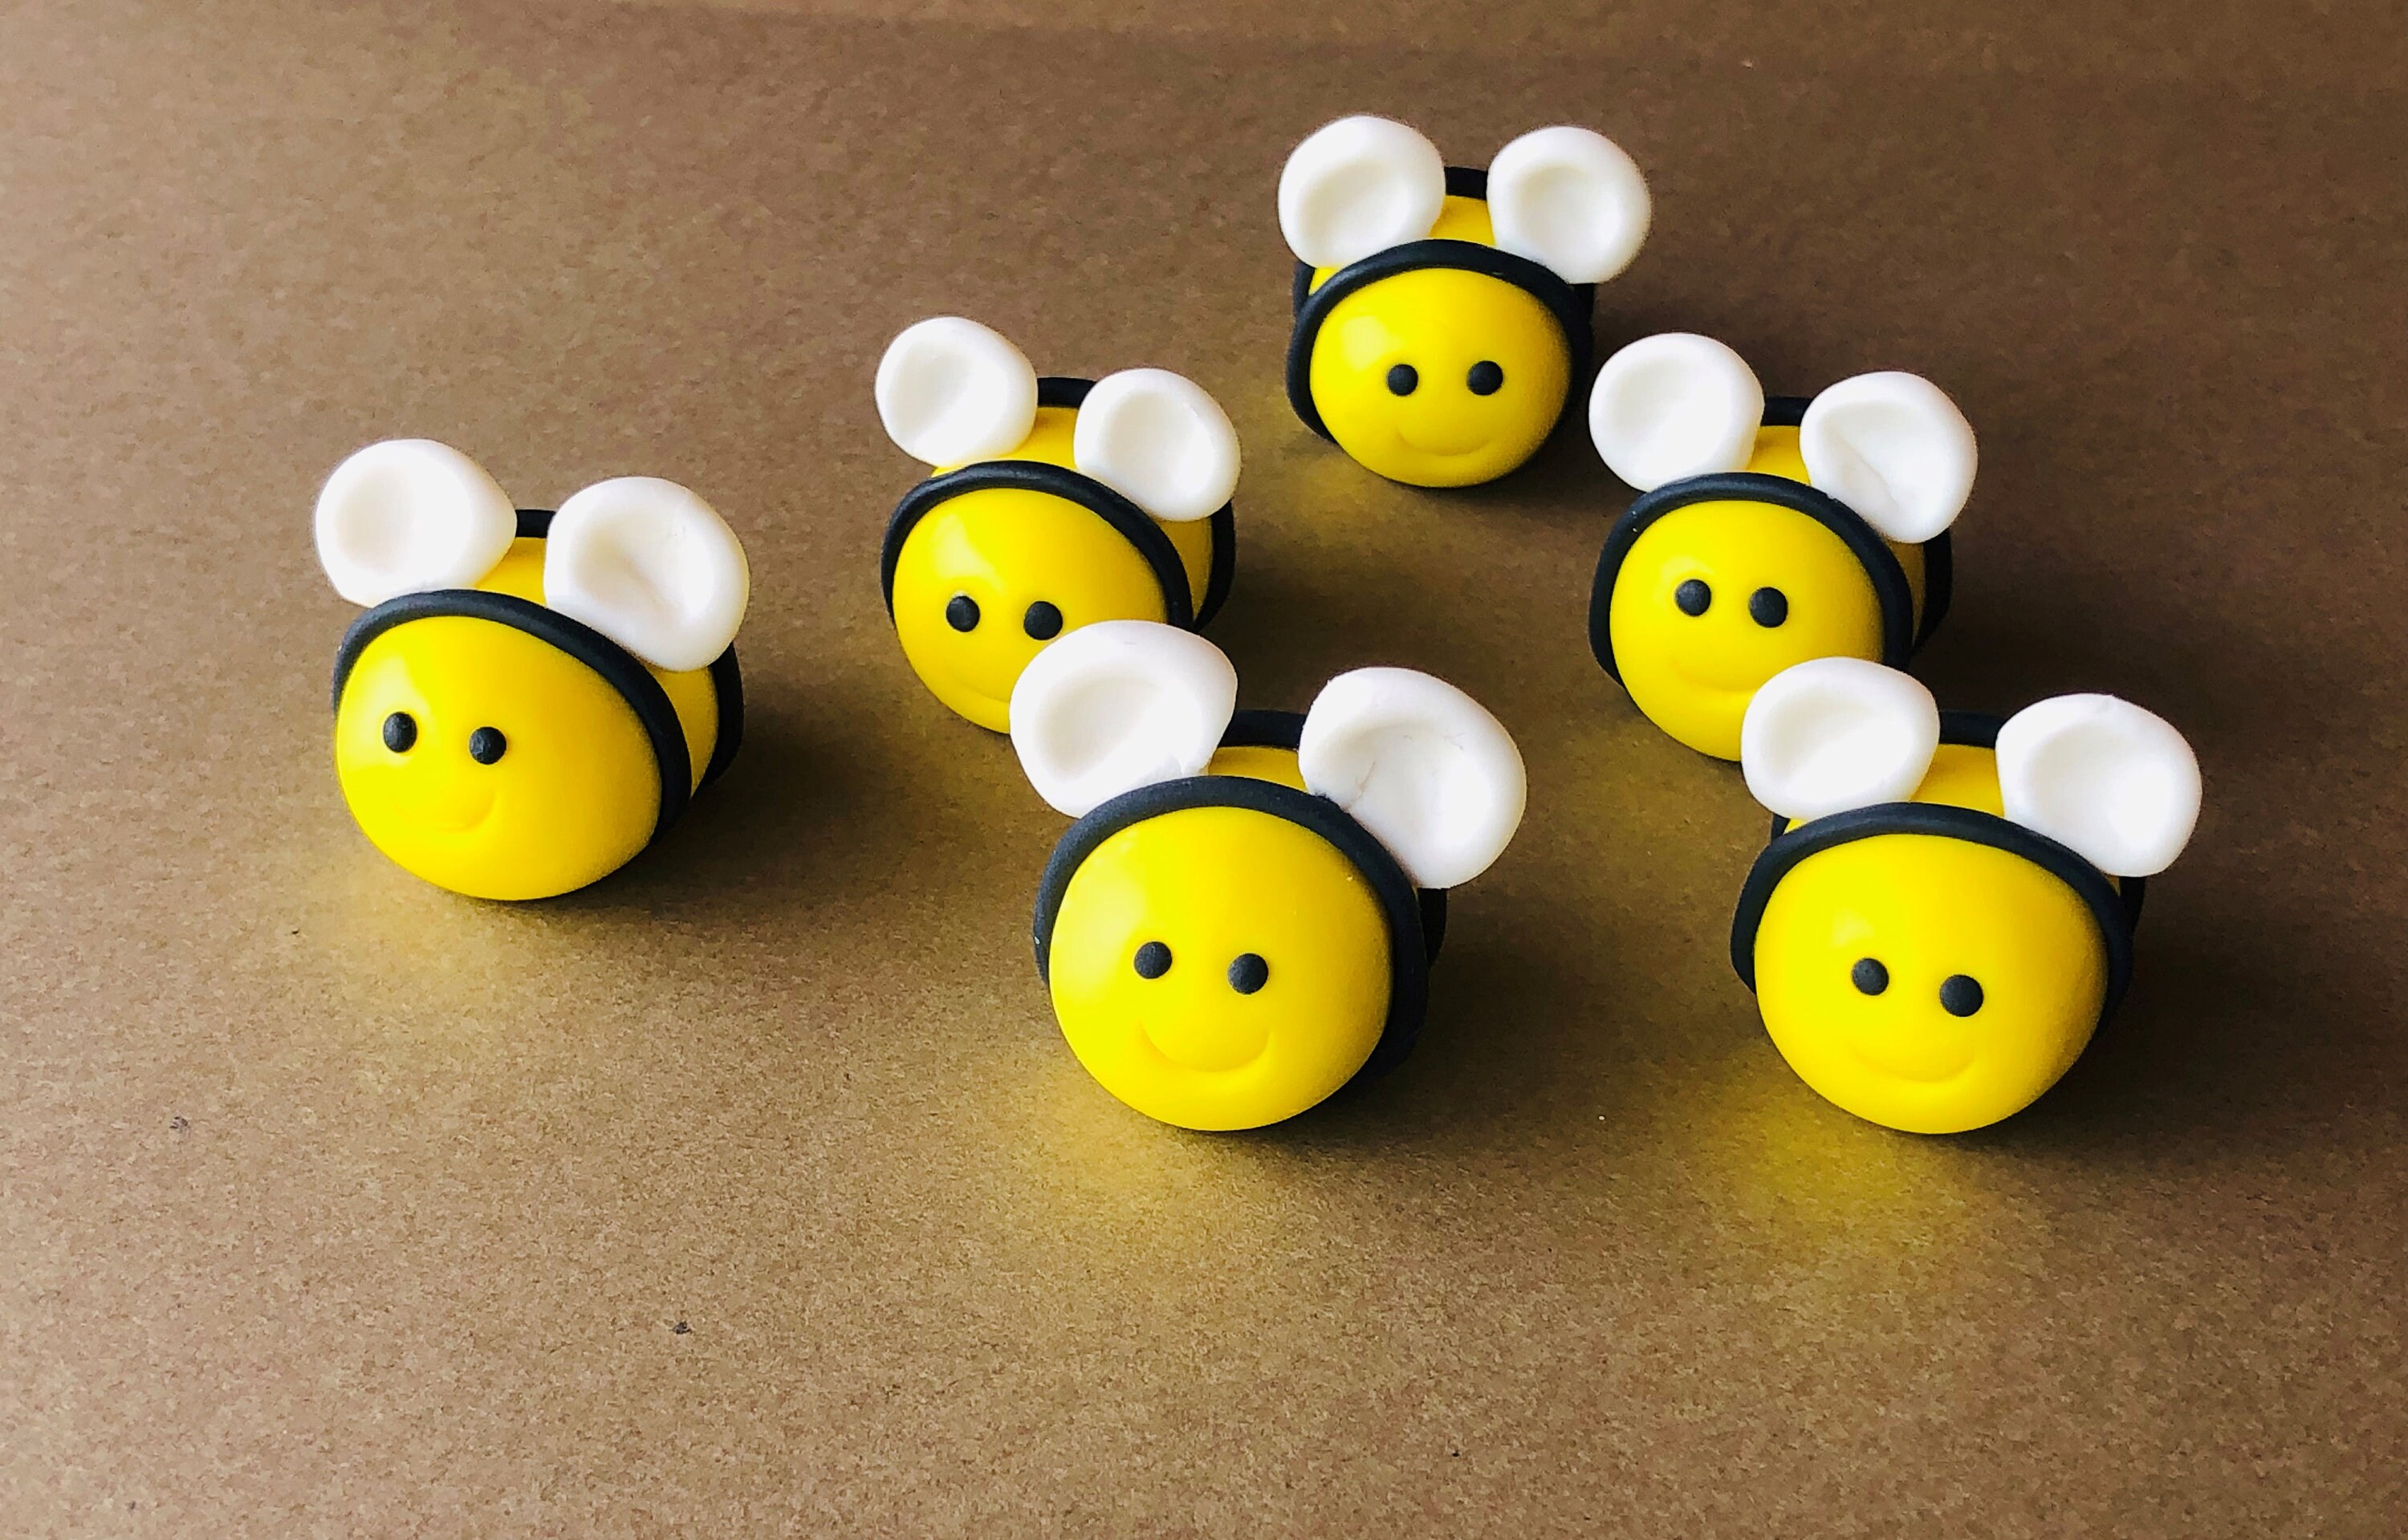  Bumblebee Bees 1/2 sheet (16 x 10 in.) Edible cake topper image  Birthday Party Decoration. : Grocery & Gourmet Food